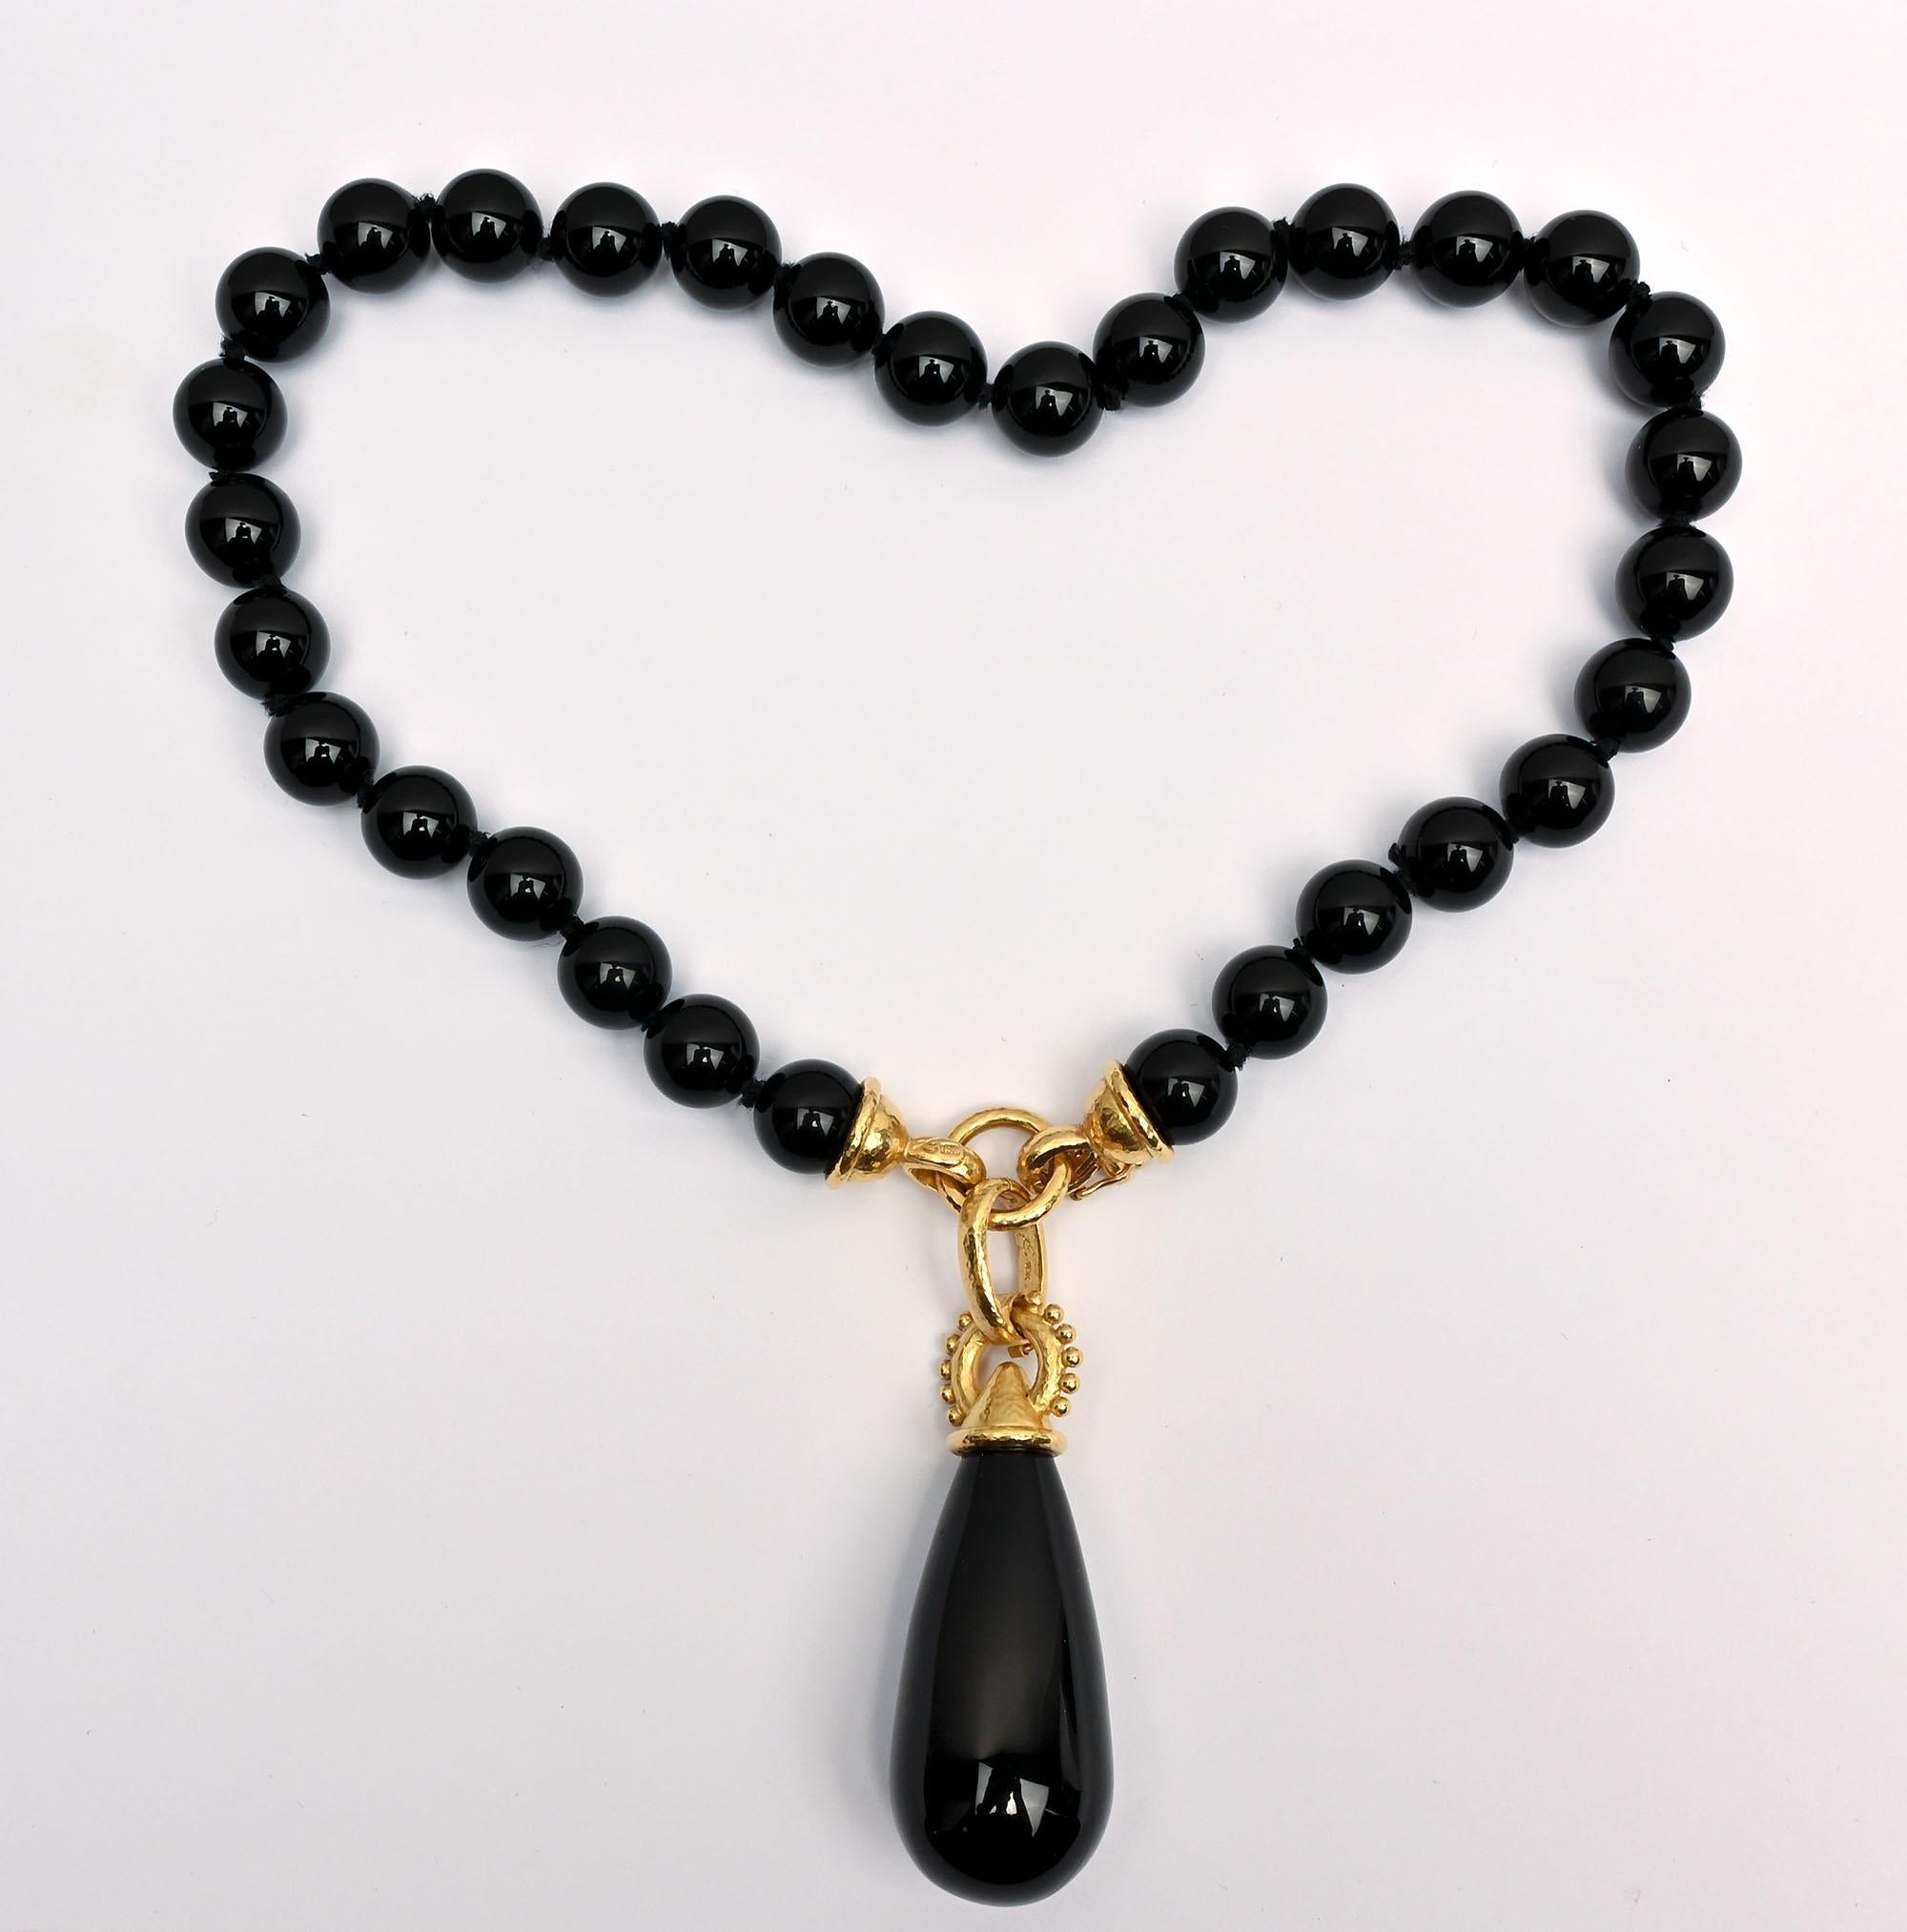 Beautiful pear shaped onyx pendant by Elizabeth Locke. It can be worn on any number of necklaces but came with the onyx beads necklace listed as item 
LU13322796422. The pendant measures 3 inches long  to the top of the bale. It would look equally